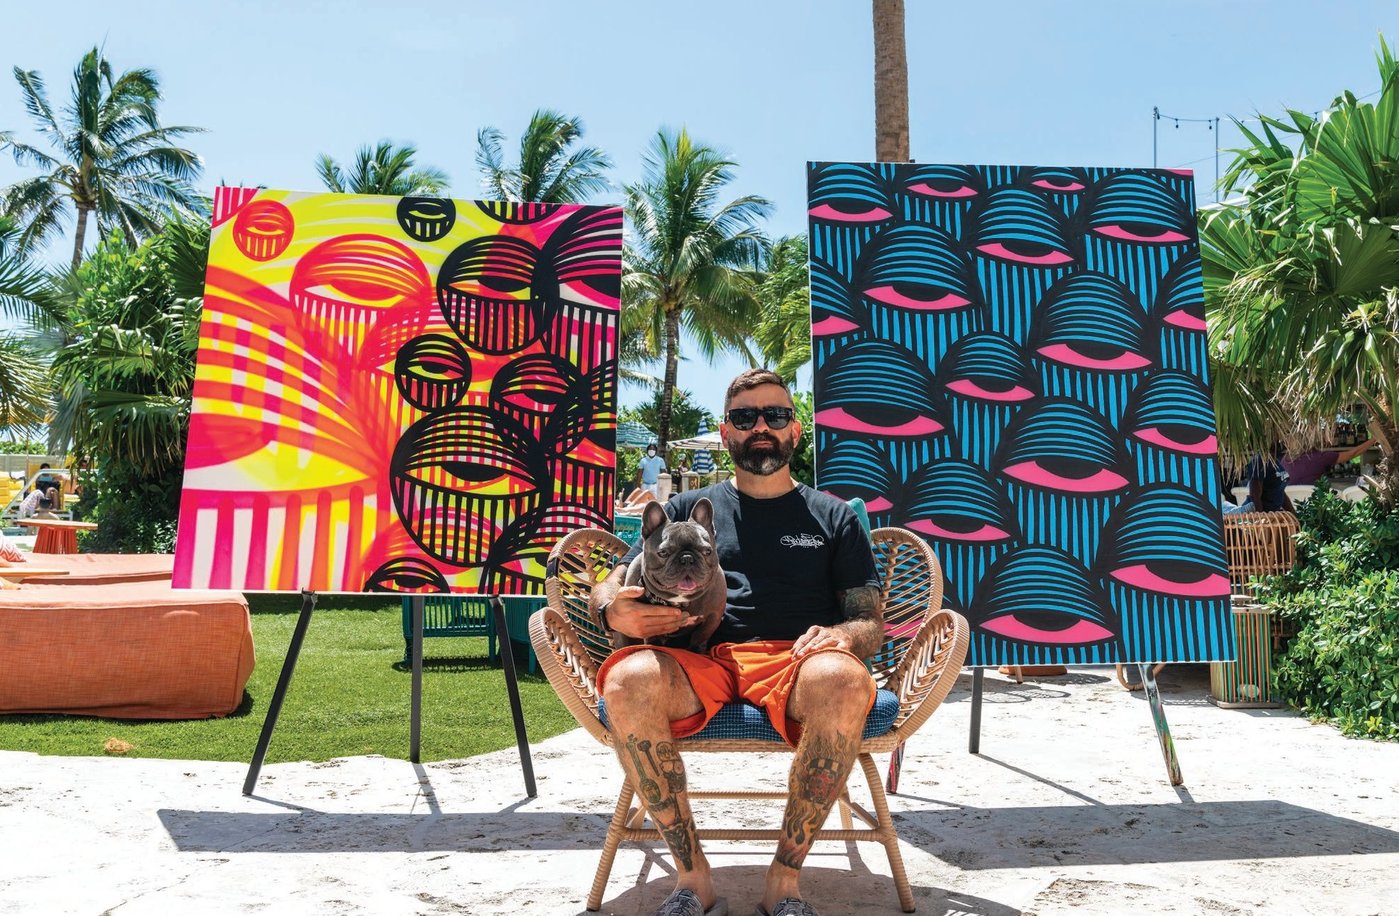 Ahol Sniffs Glue debuting his On Location exhibition at The Confidante Miami Beach Hotel in collaboration with The Museum of Graffiti PHOTO COURTESY OF THE CONFIDANTE MIAMI BEACH HOTEL